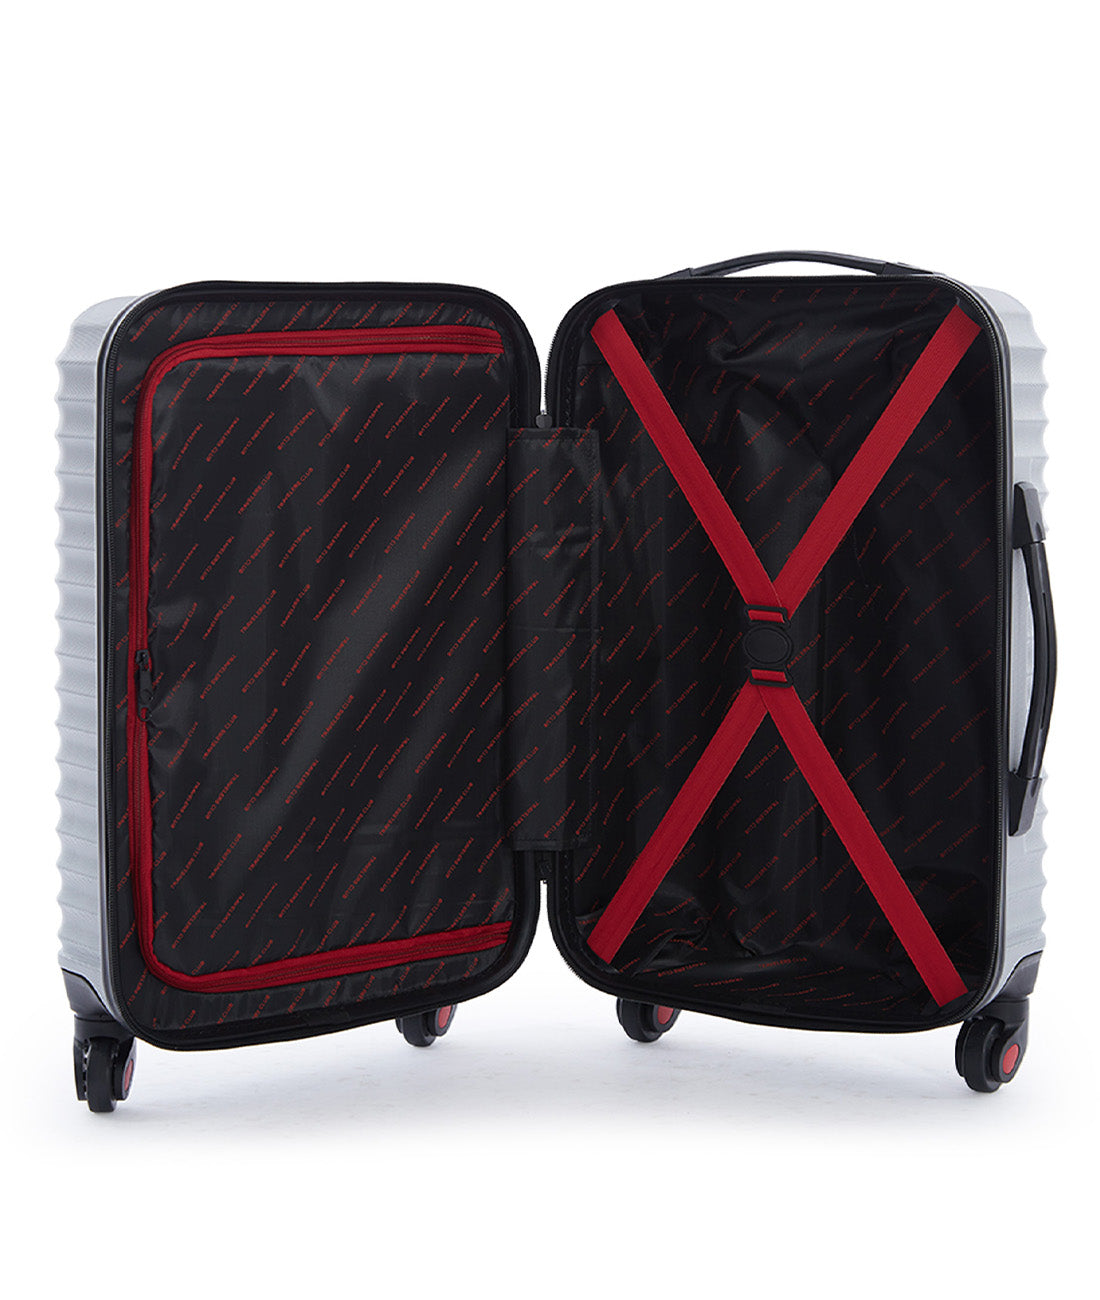 Travelers Club | Tour Collection | 6Pc Luggage Set